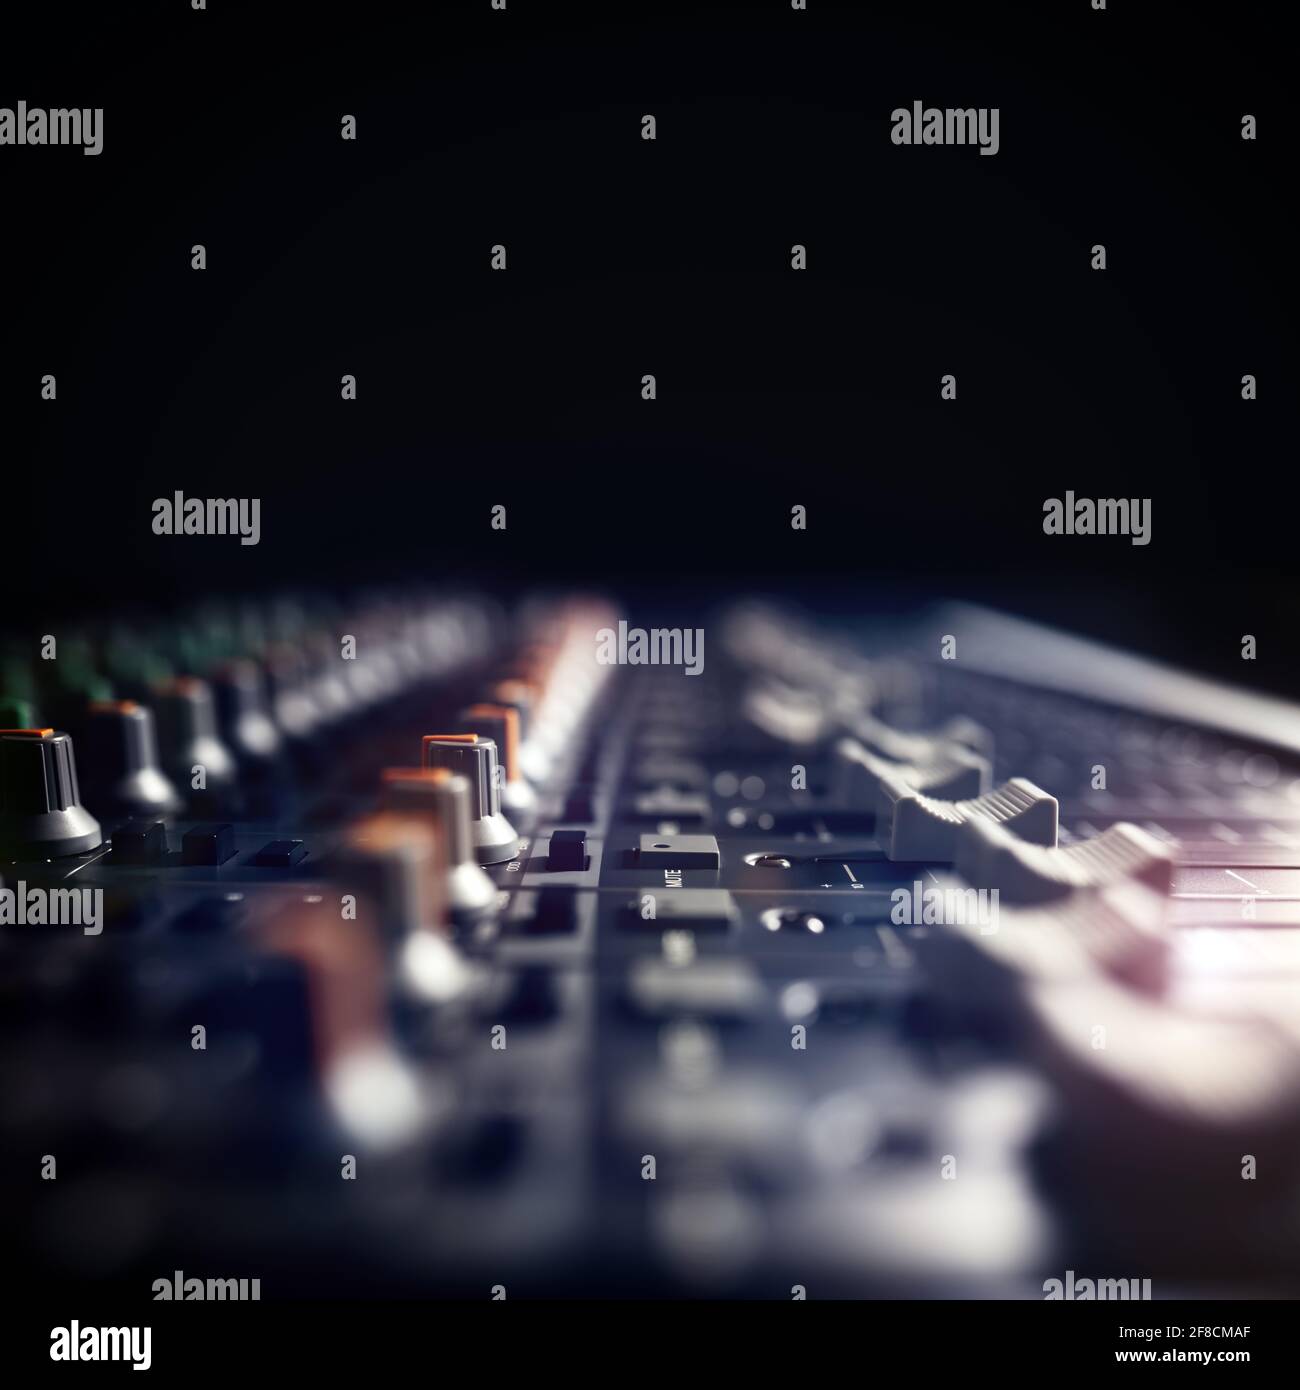 Sound recording studio mixing desk for music production Stock Photo